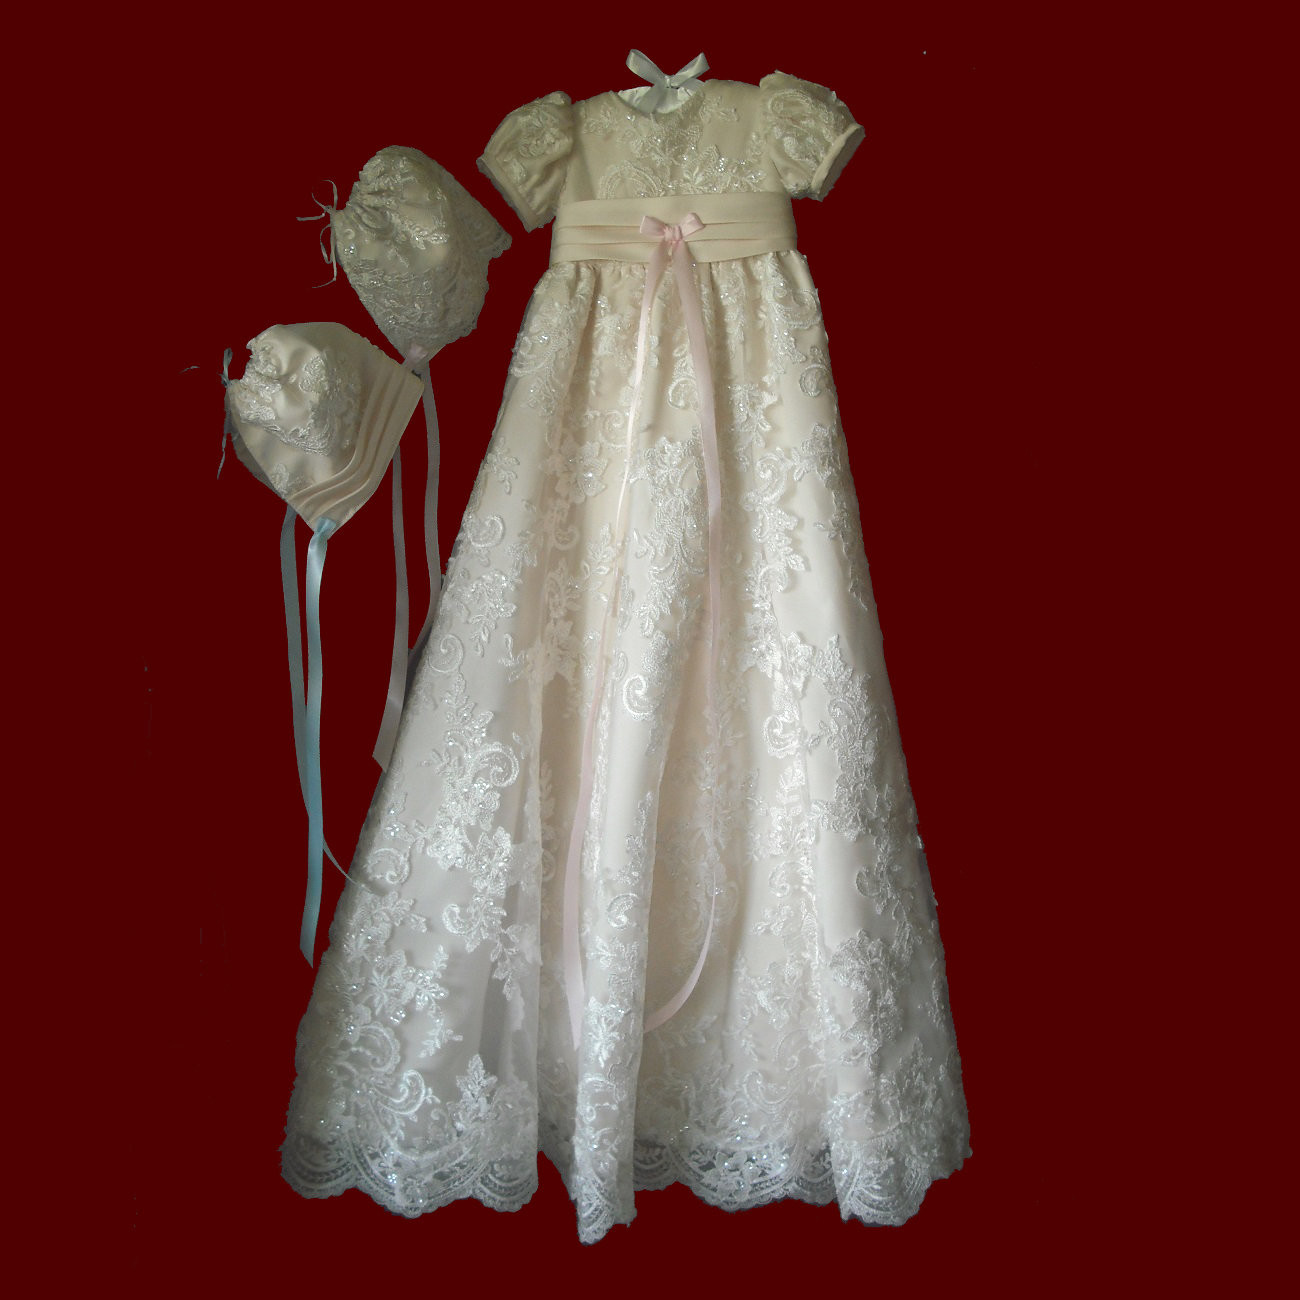 Christening Gown From Wedding Dress
 Christening Gown Made From Your Wedding Dress Girls